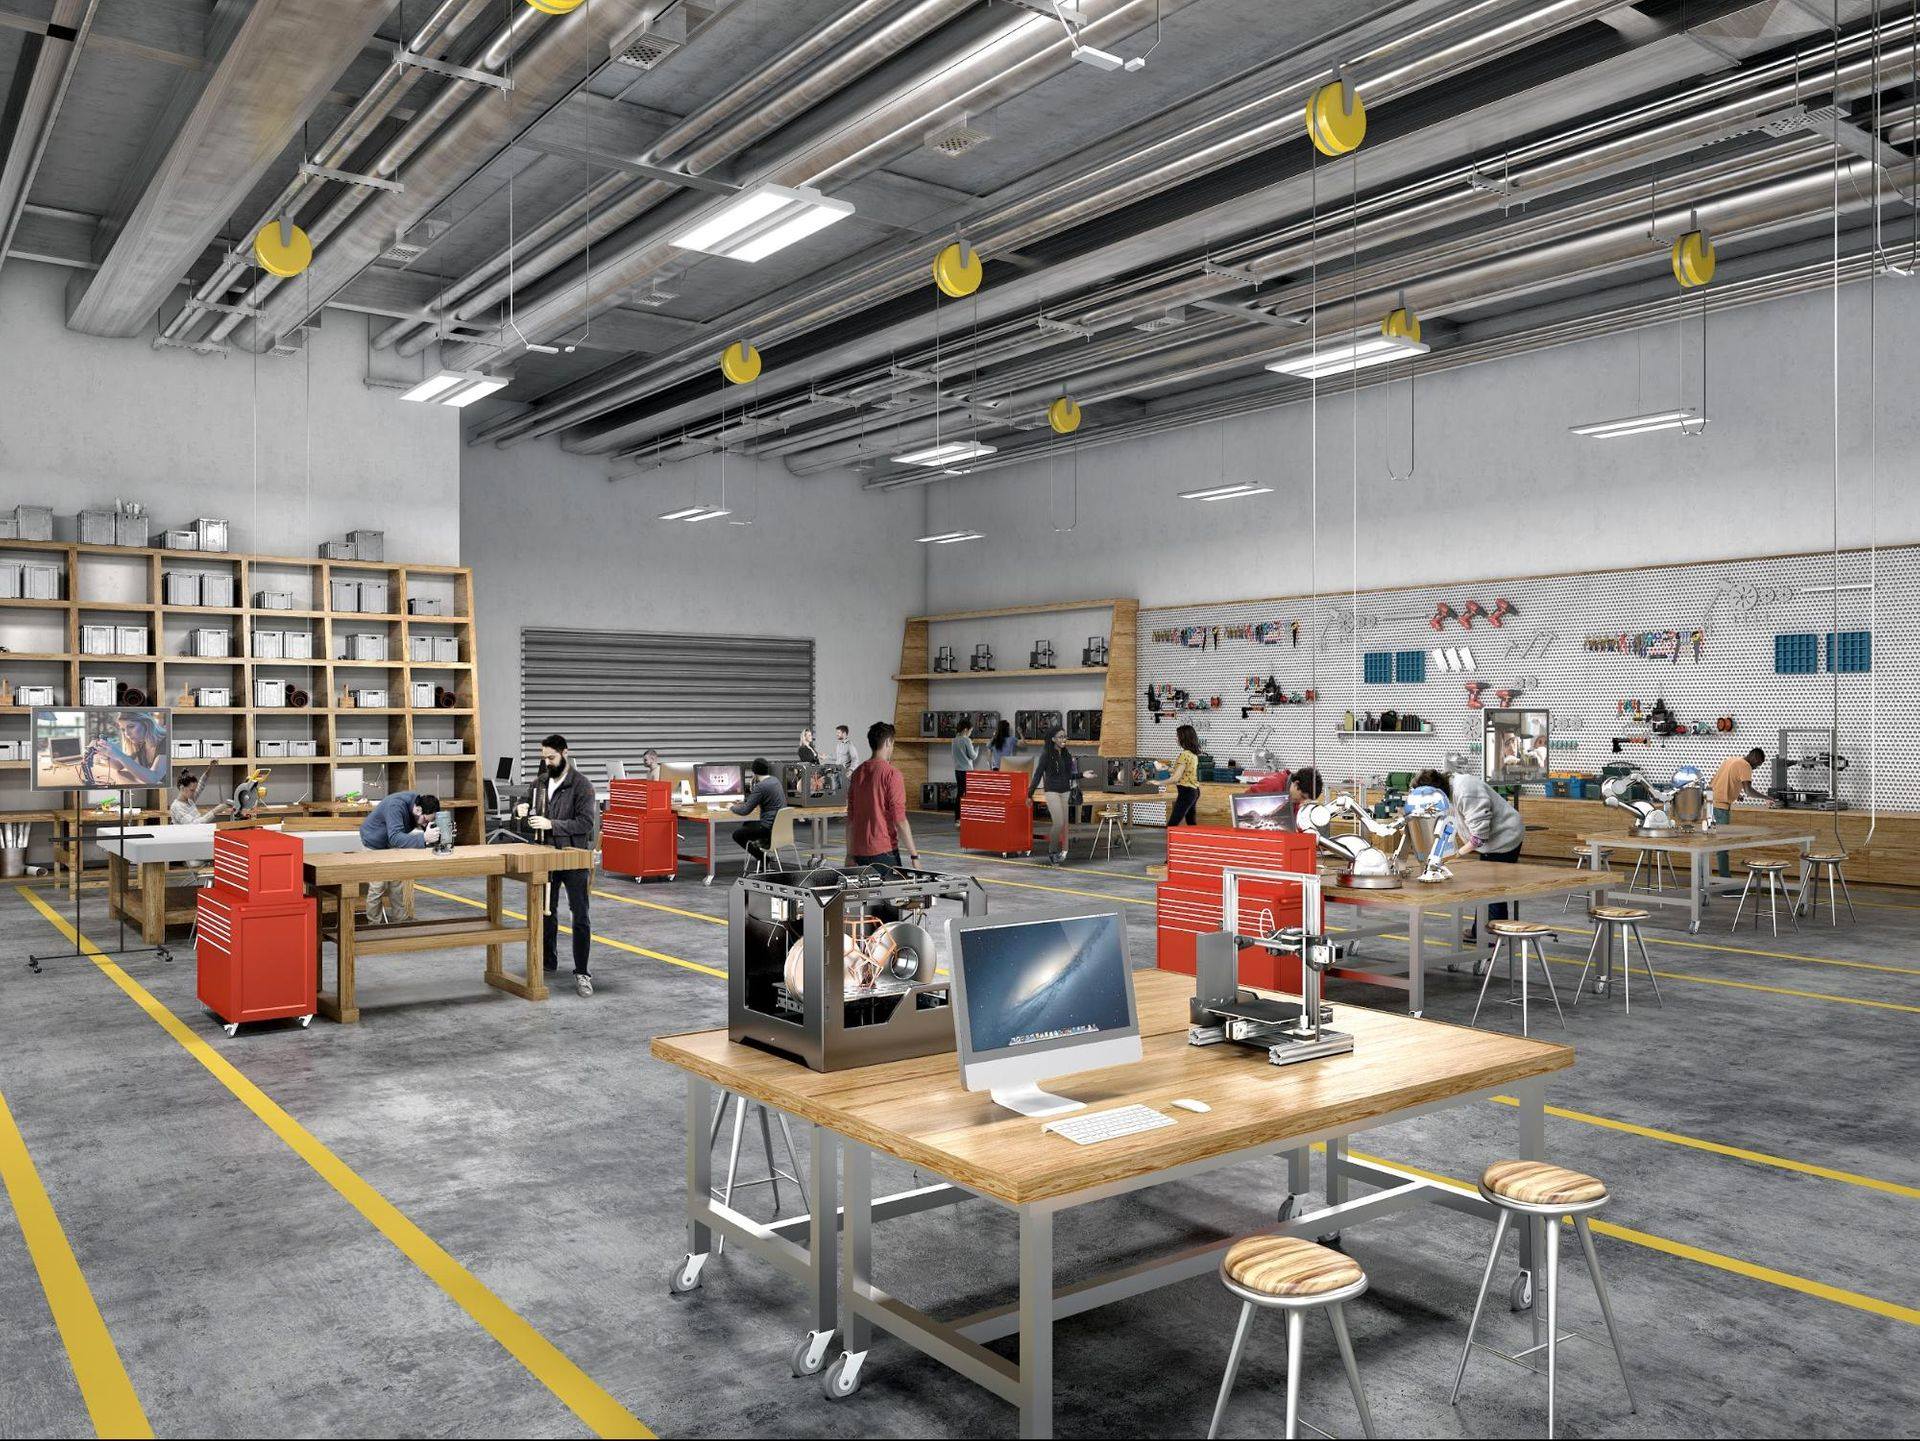 The East End Maker Hub Studio showcases a vast open space adorned with desks and tables